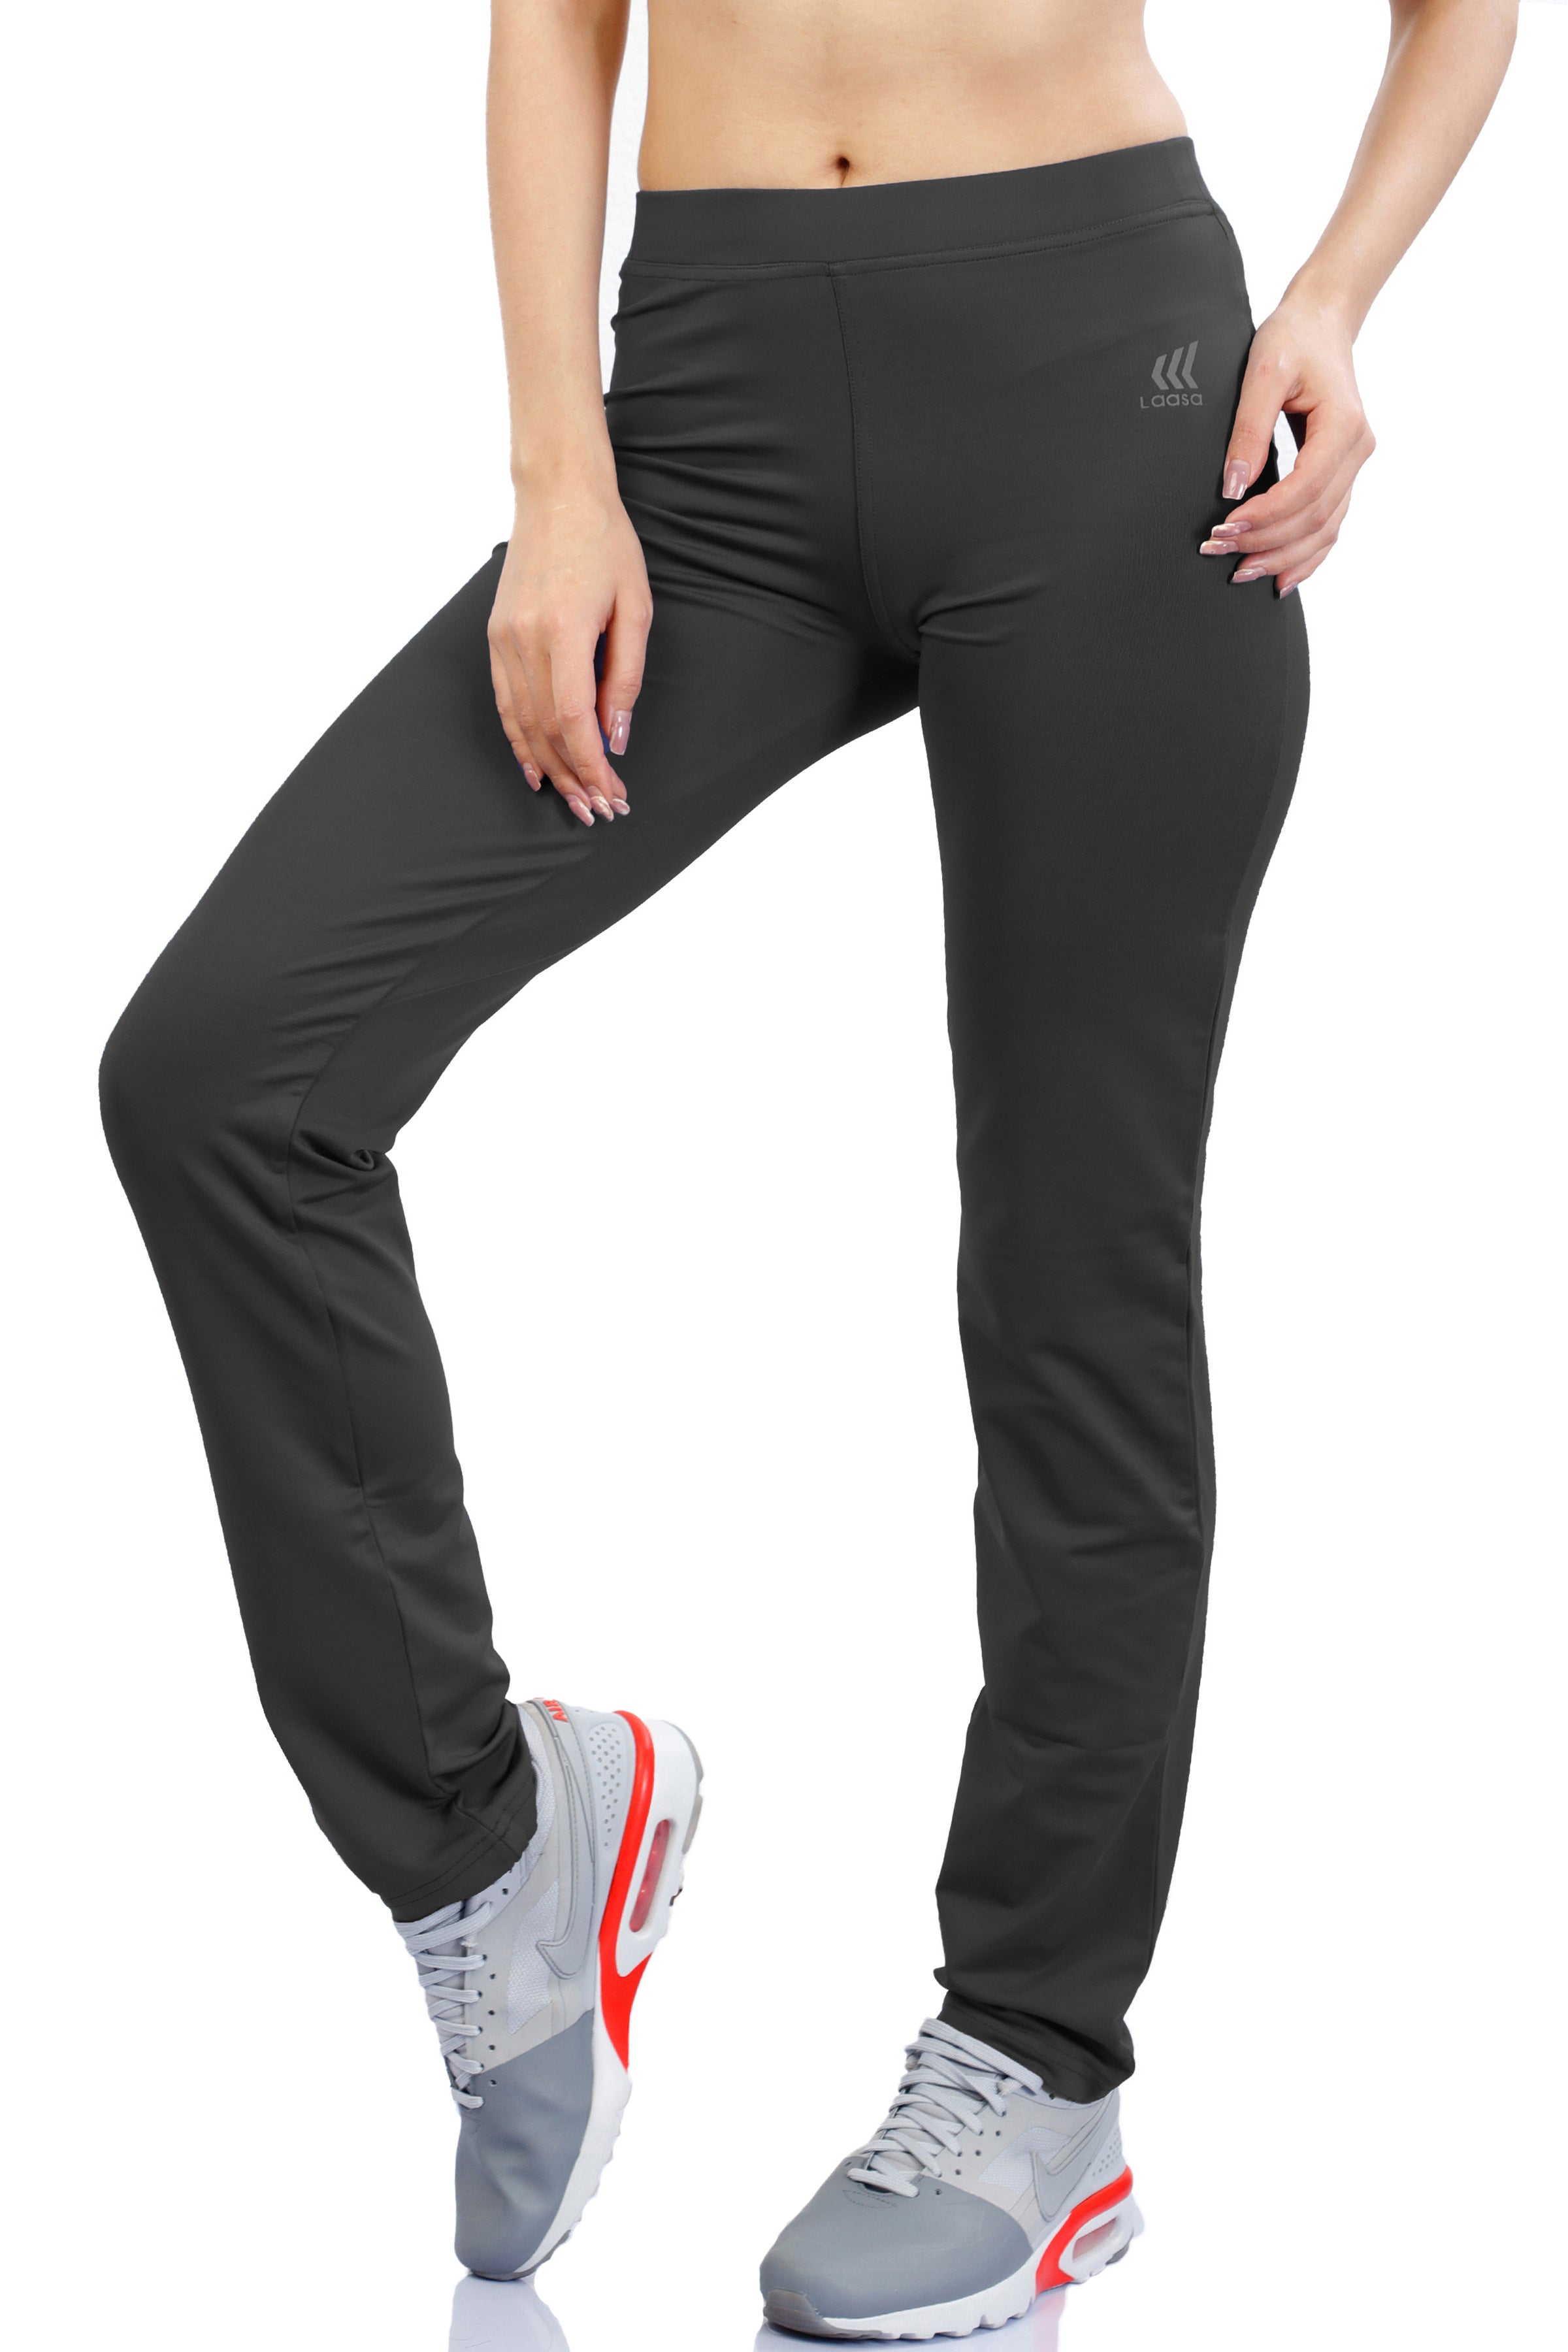 Reflect Relaxed Fit Yoga Pant | Women's Pants | Alex + Abby